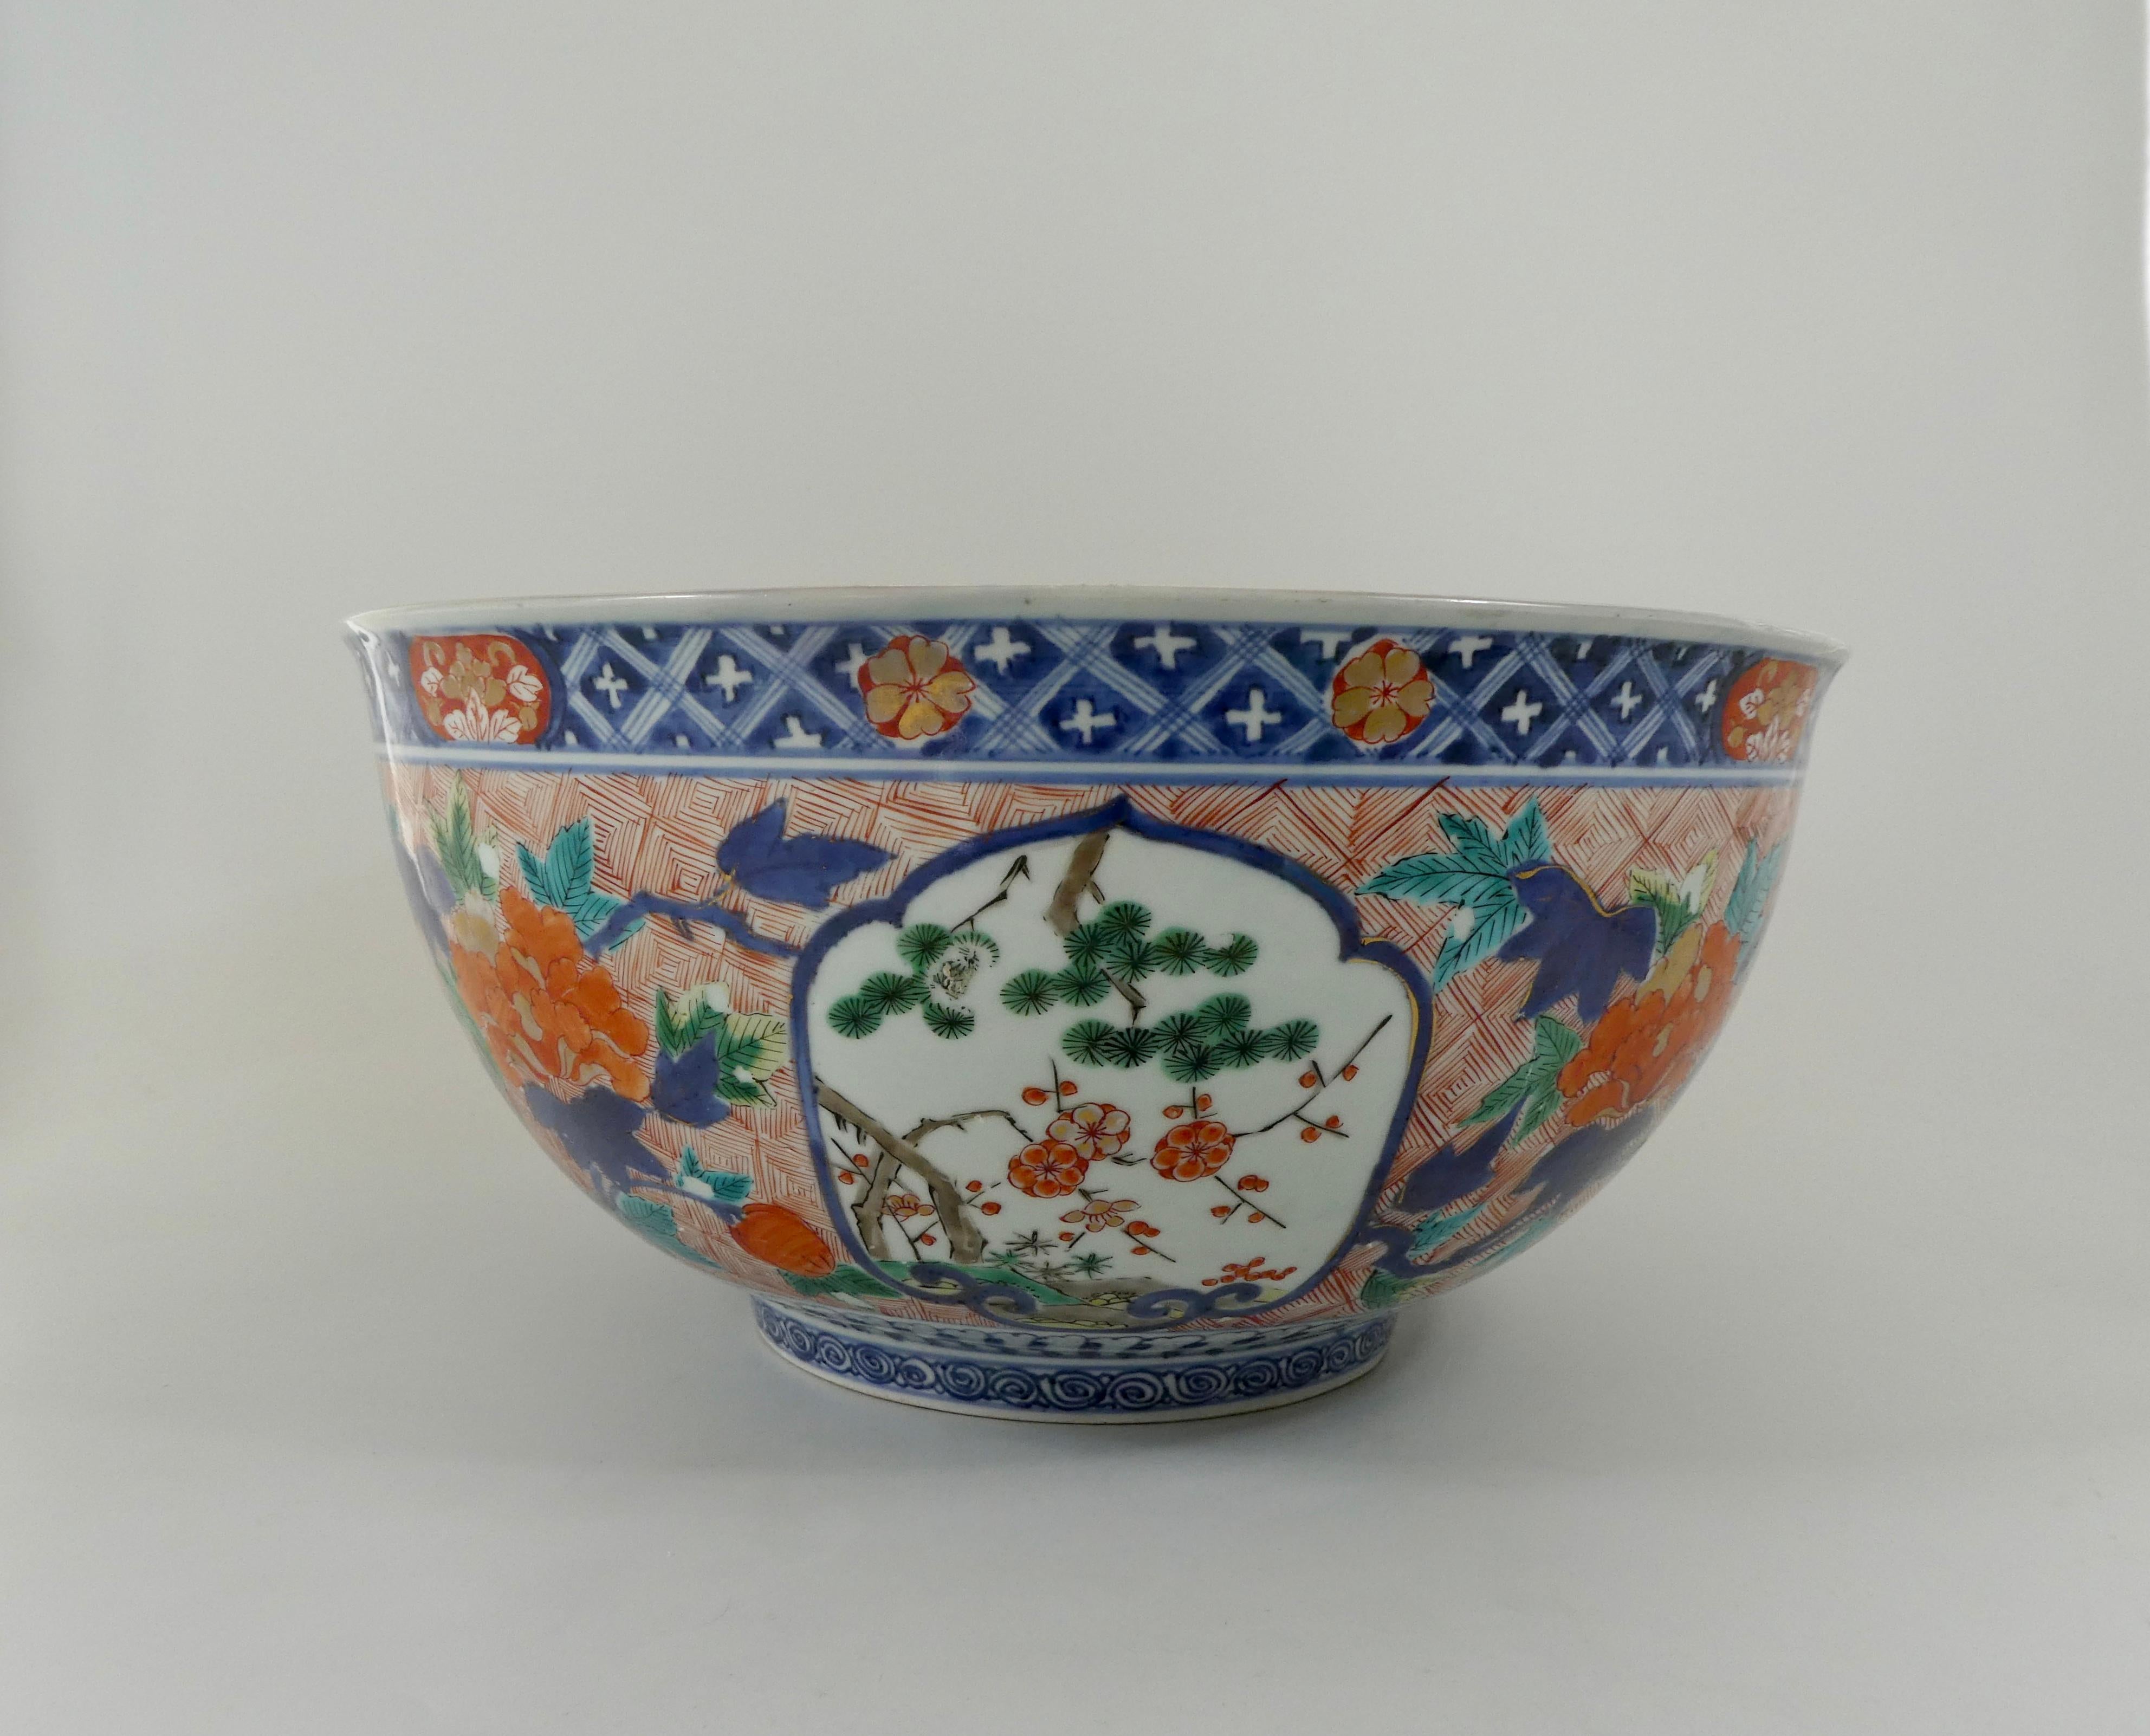 Fired Fine and Large Imari Bowl Decorated with Fish, circa 1680, Genroku Period